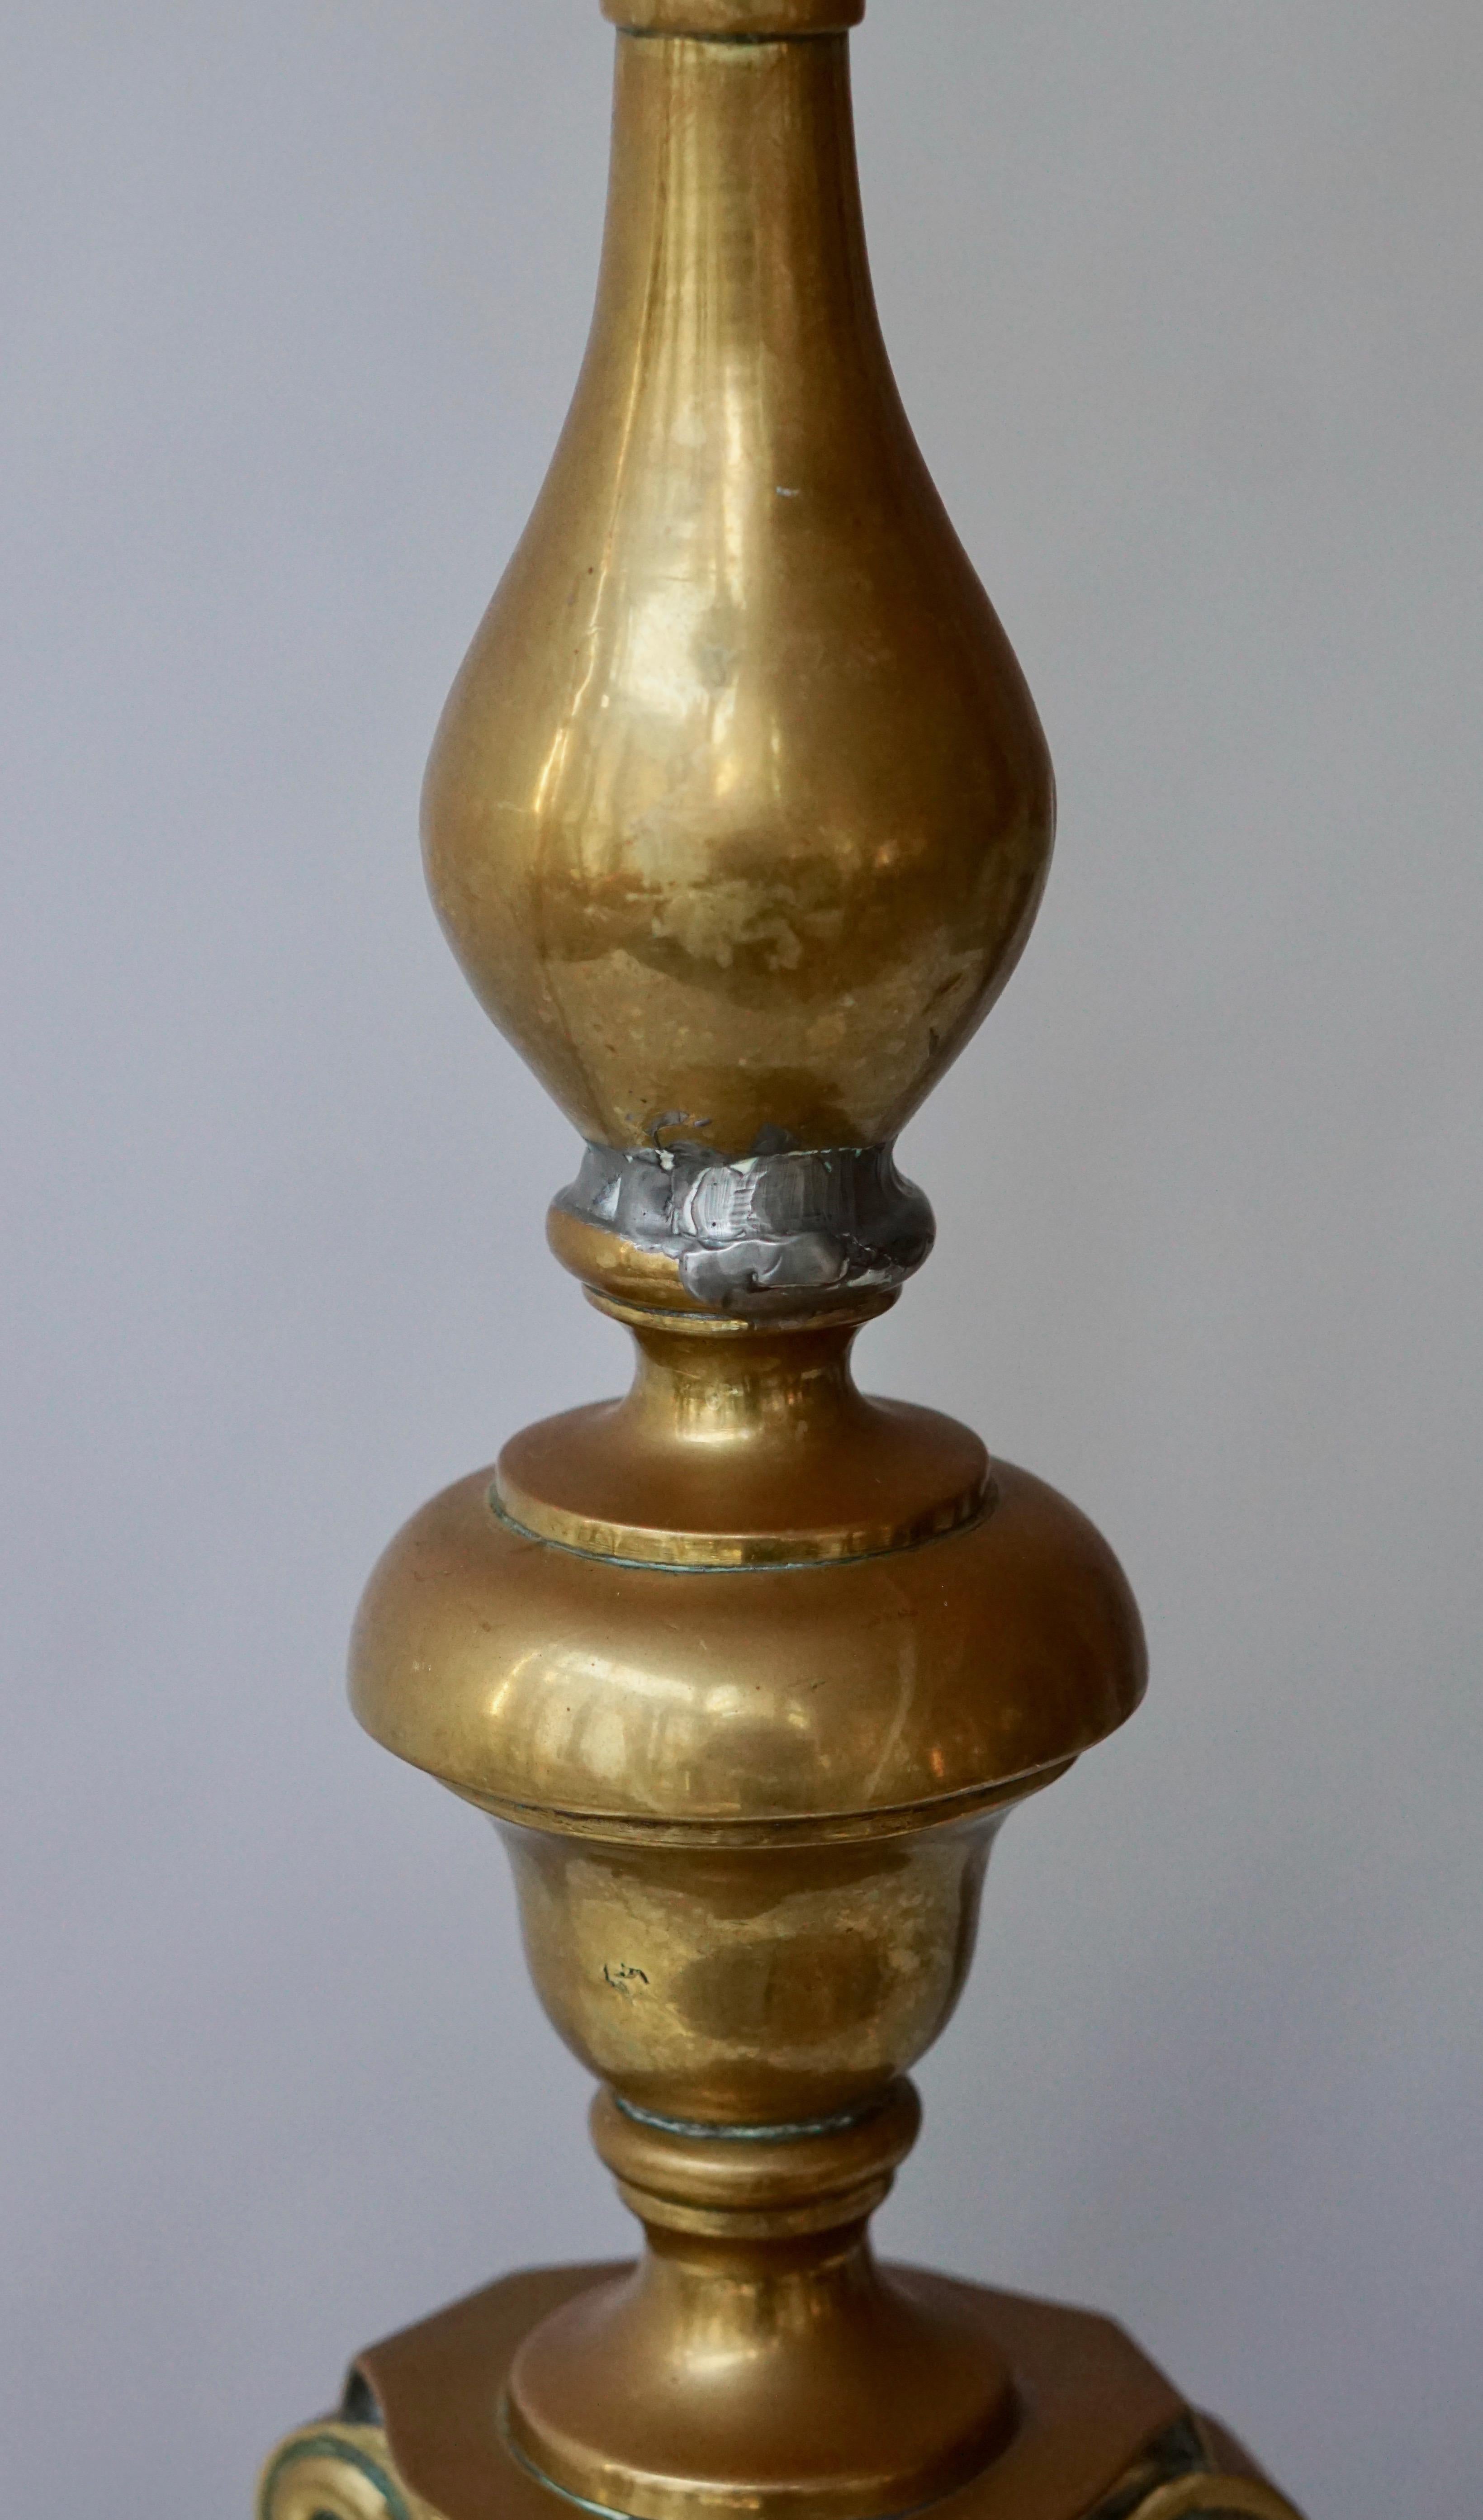 Polished Brass Tall Torchere, Candlestick or Prickets, 19th Century For Sale 6